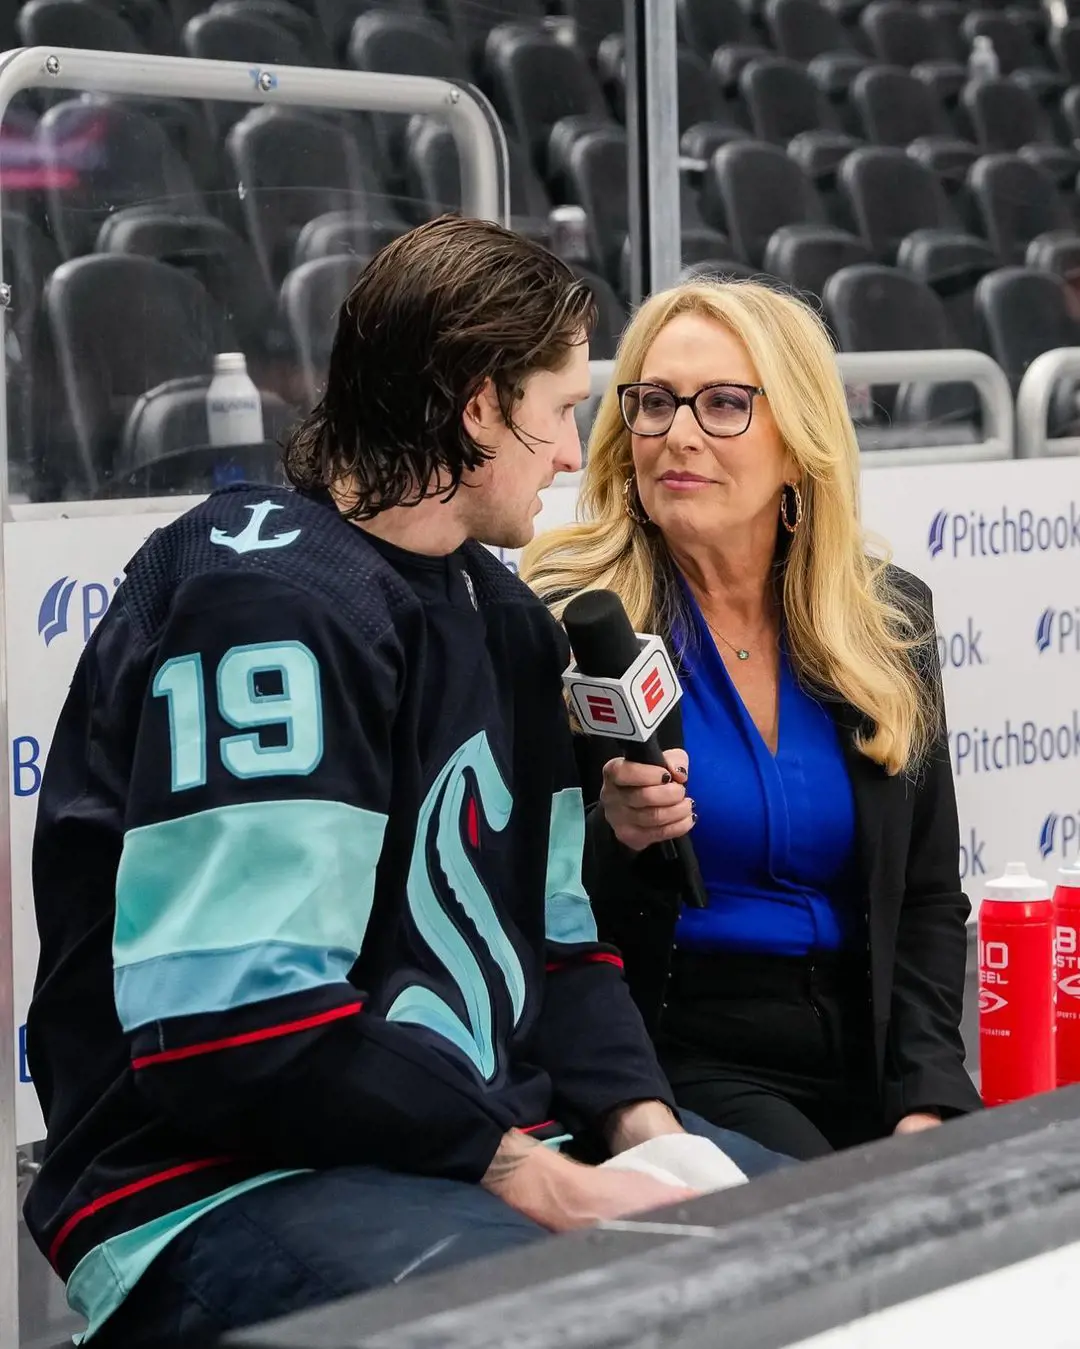 Linda interviewing ice hockey player Jared McCann at Climate Pledge Arena on April 8, 2023.